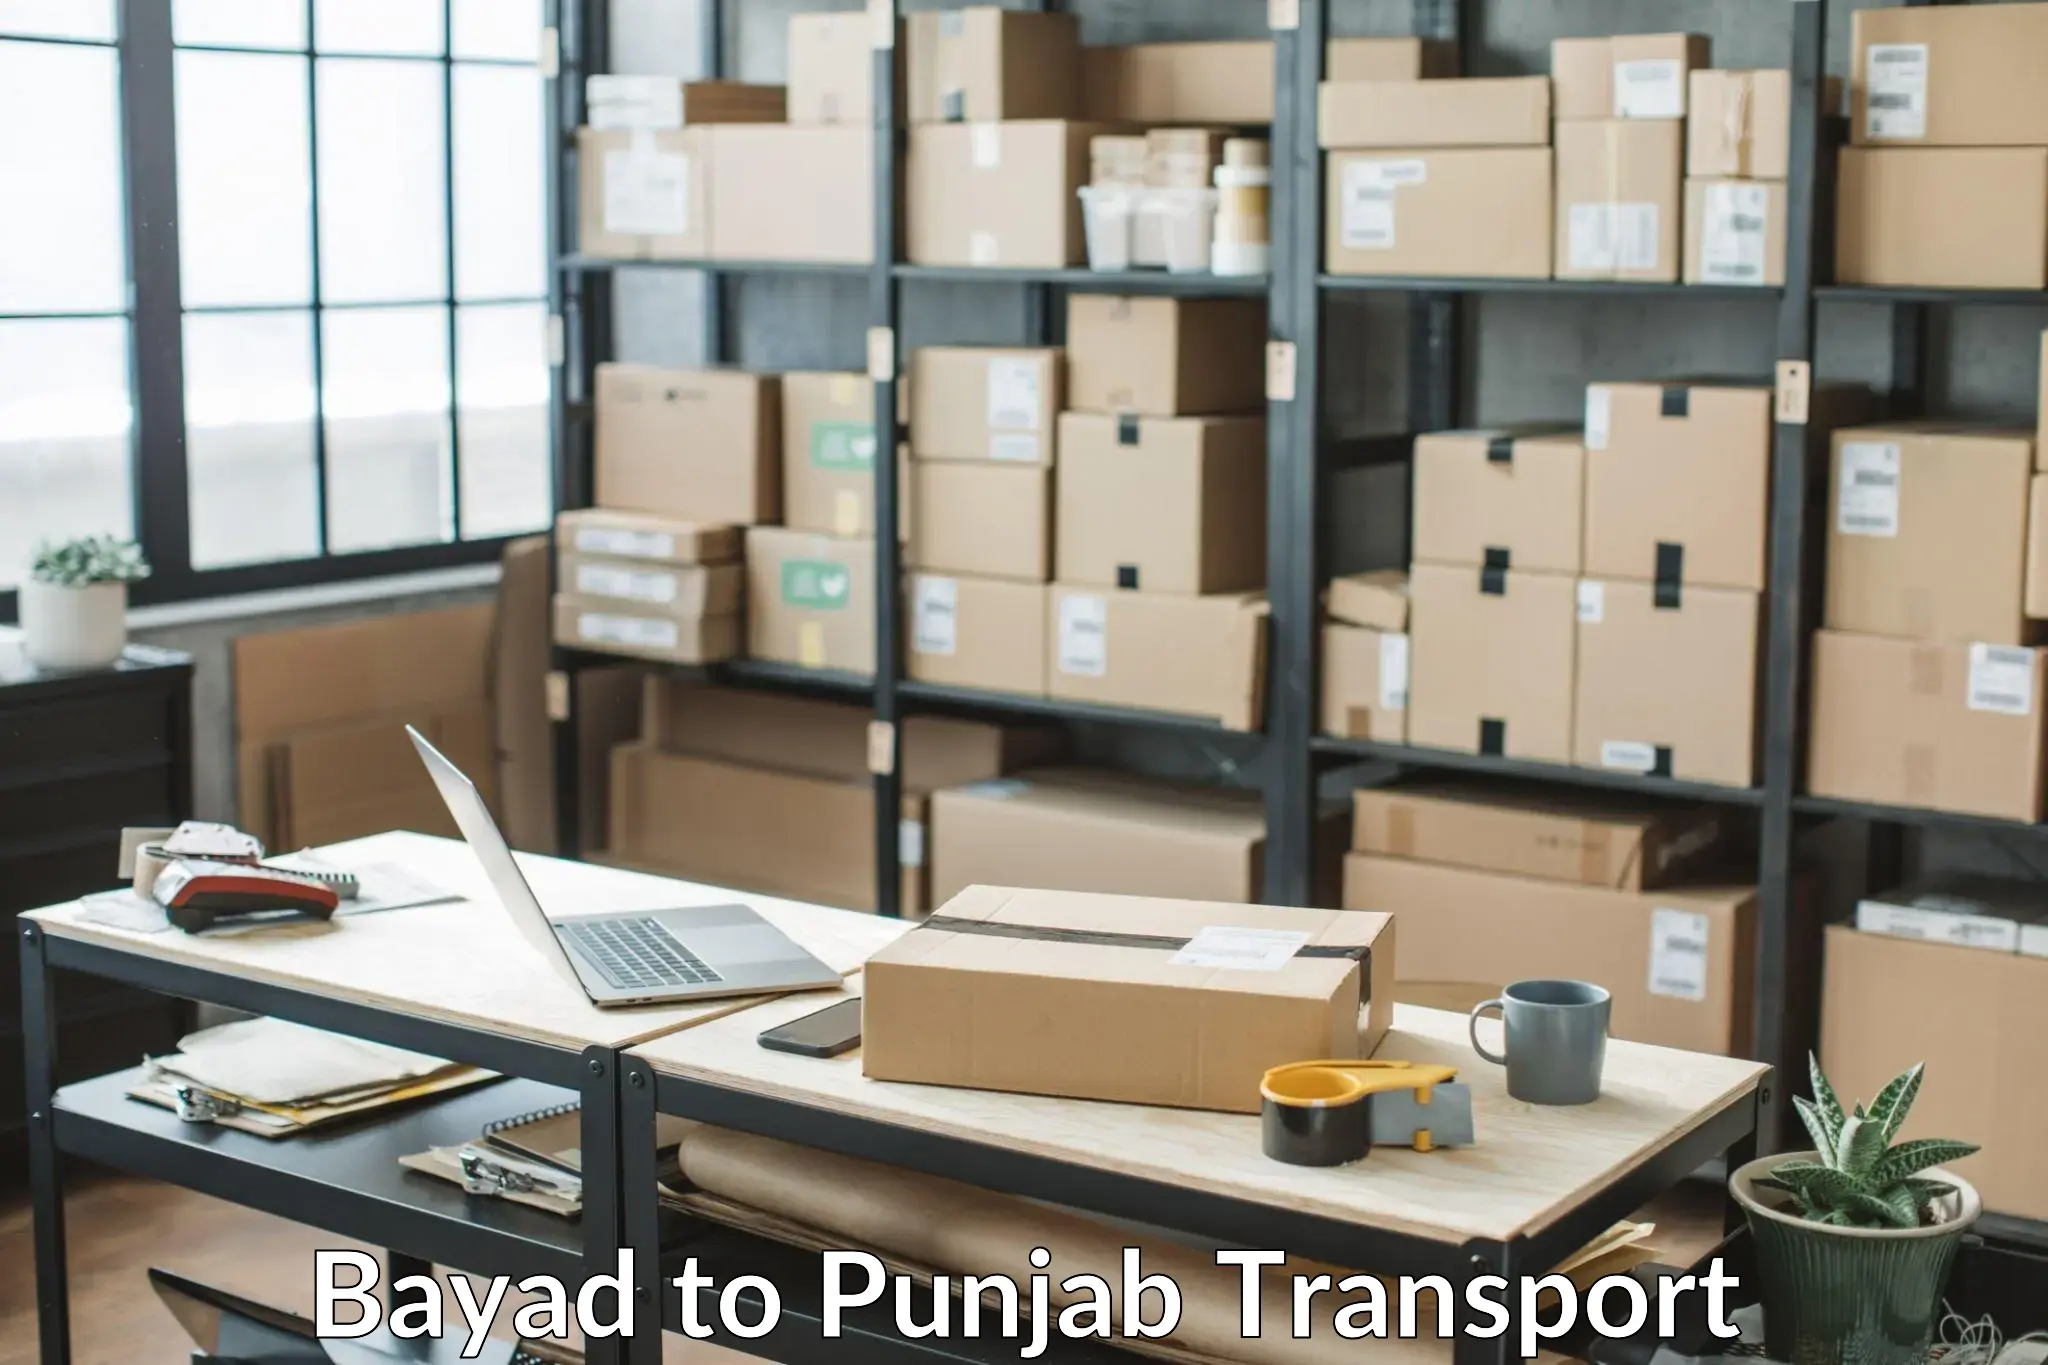 Commercial transport service Bayad to Firozpur